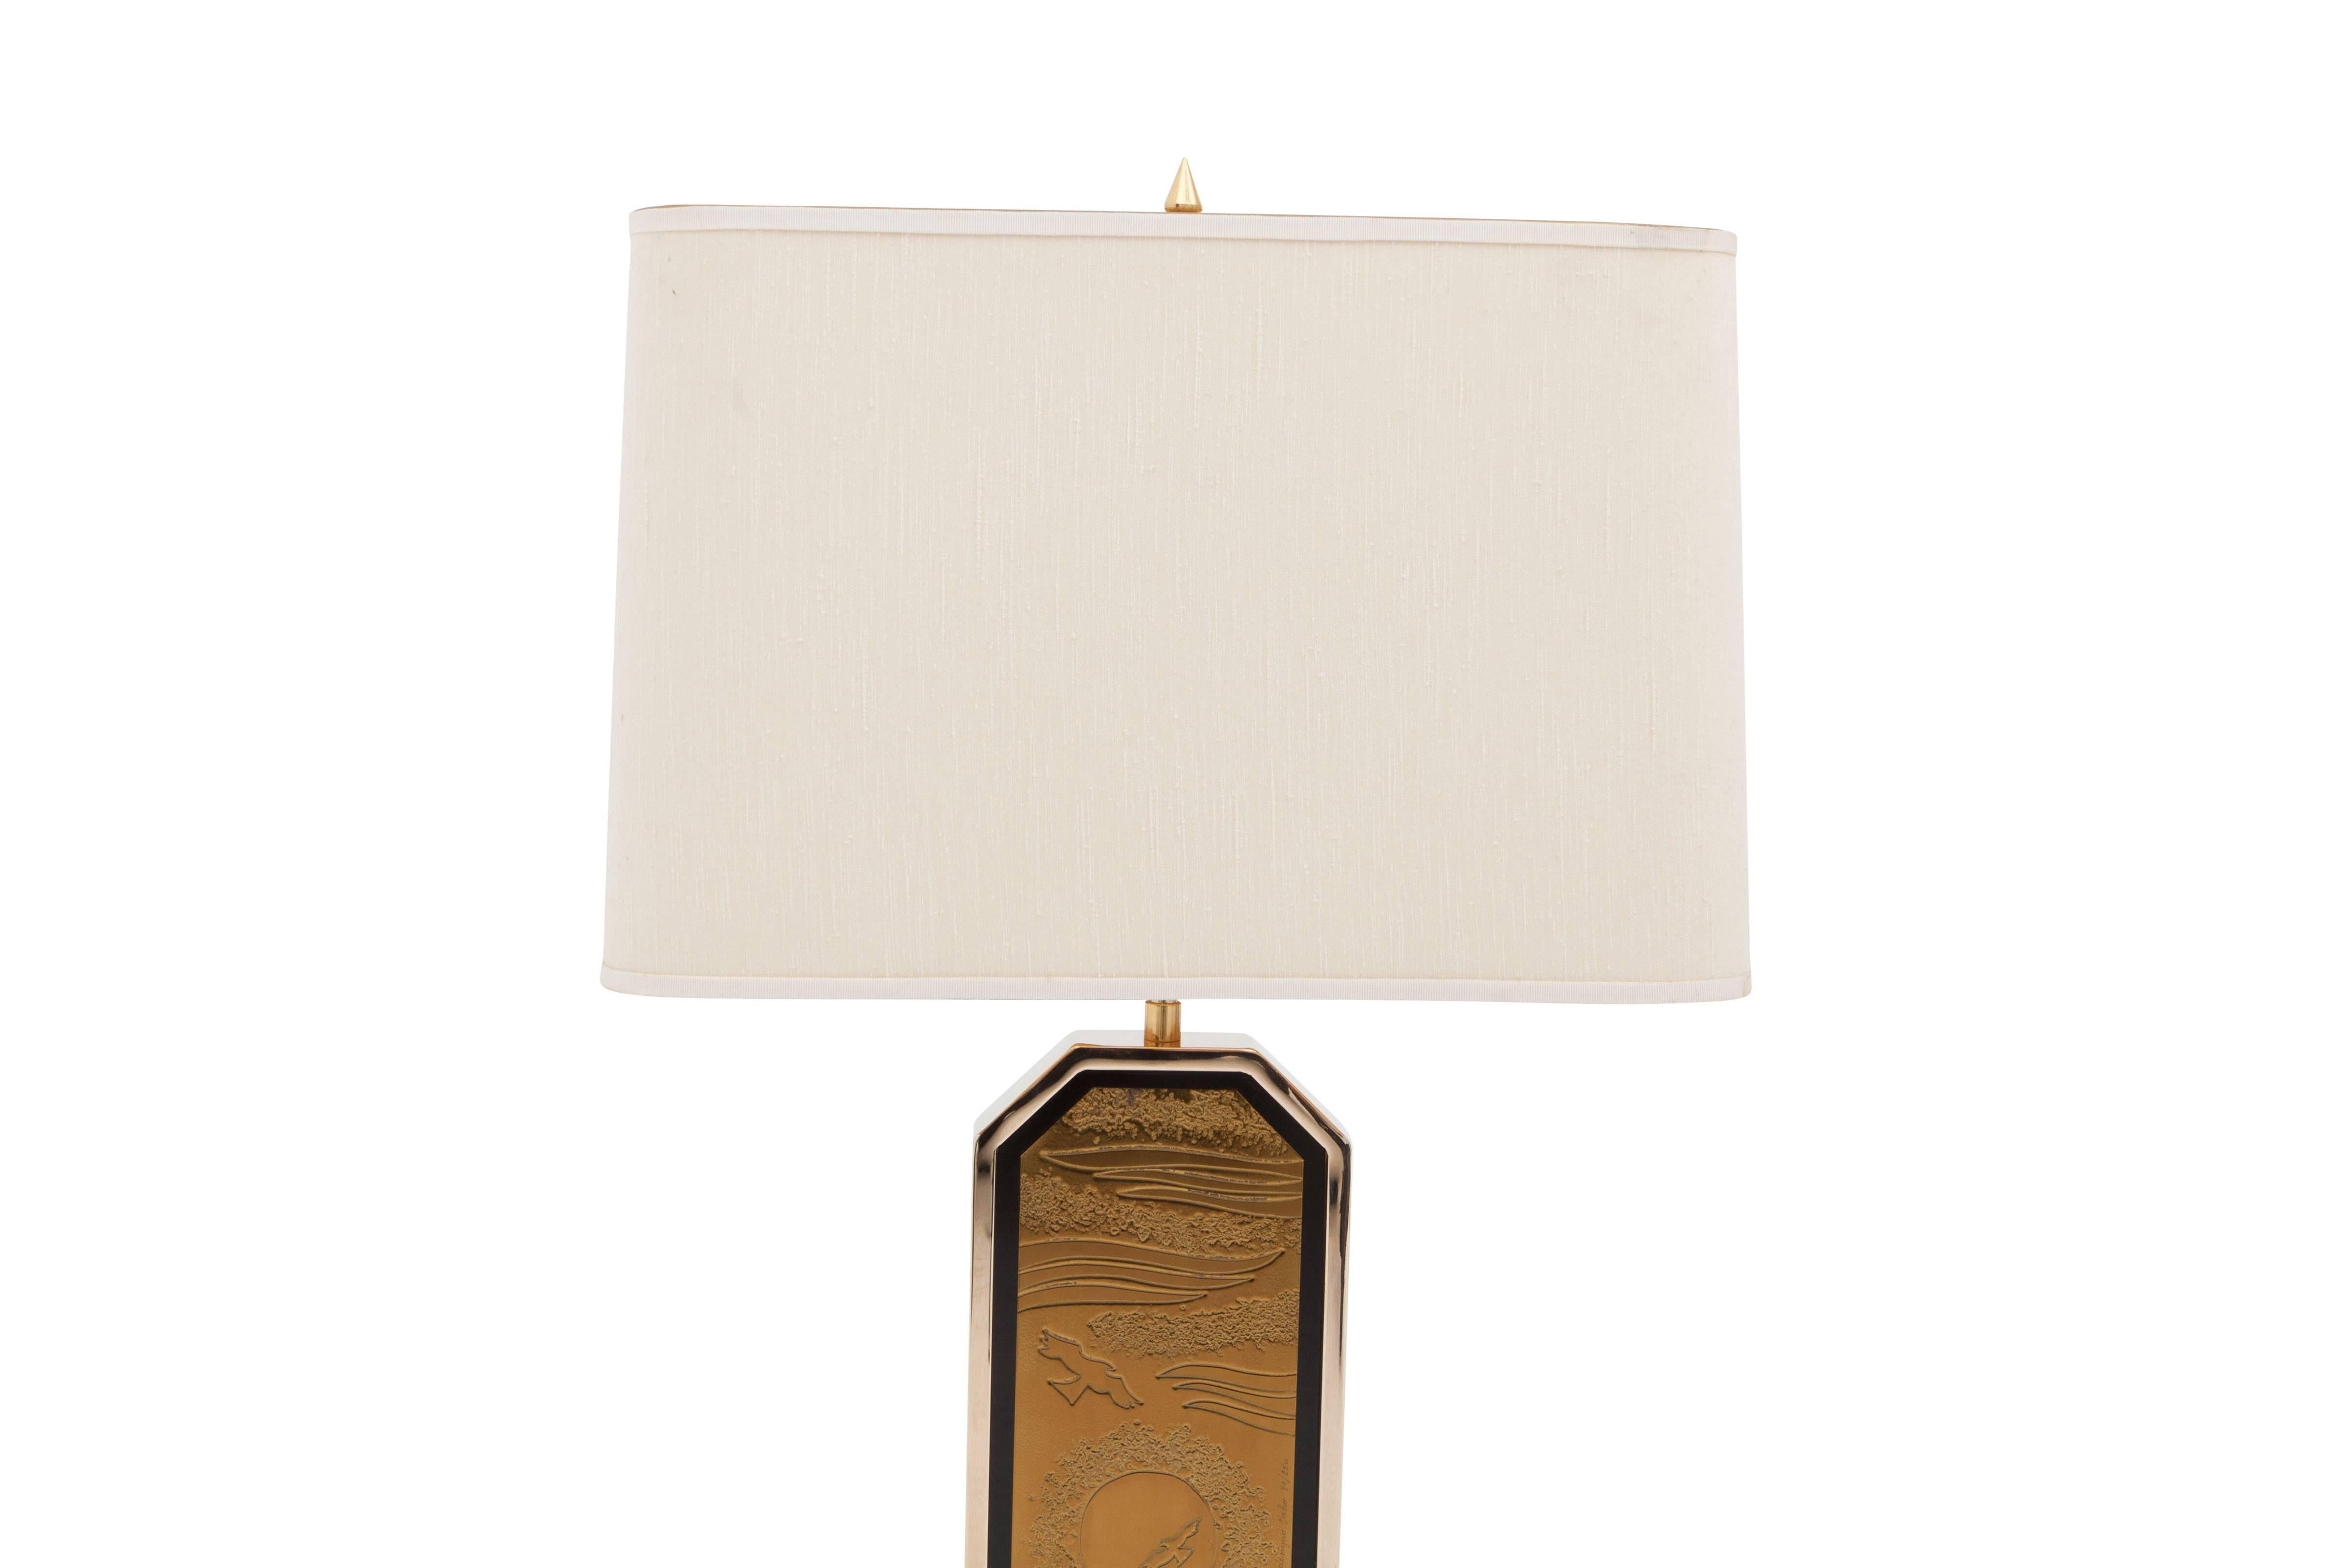 Late 20th Century Gold-Plated Brass Etched Table Lamp